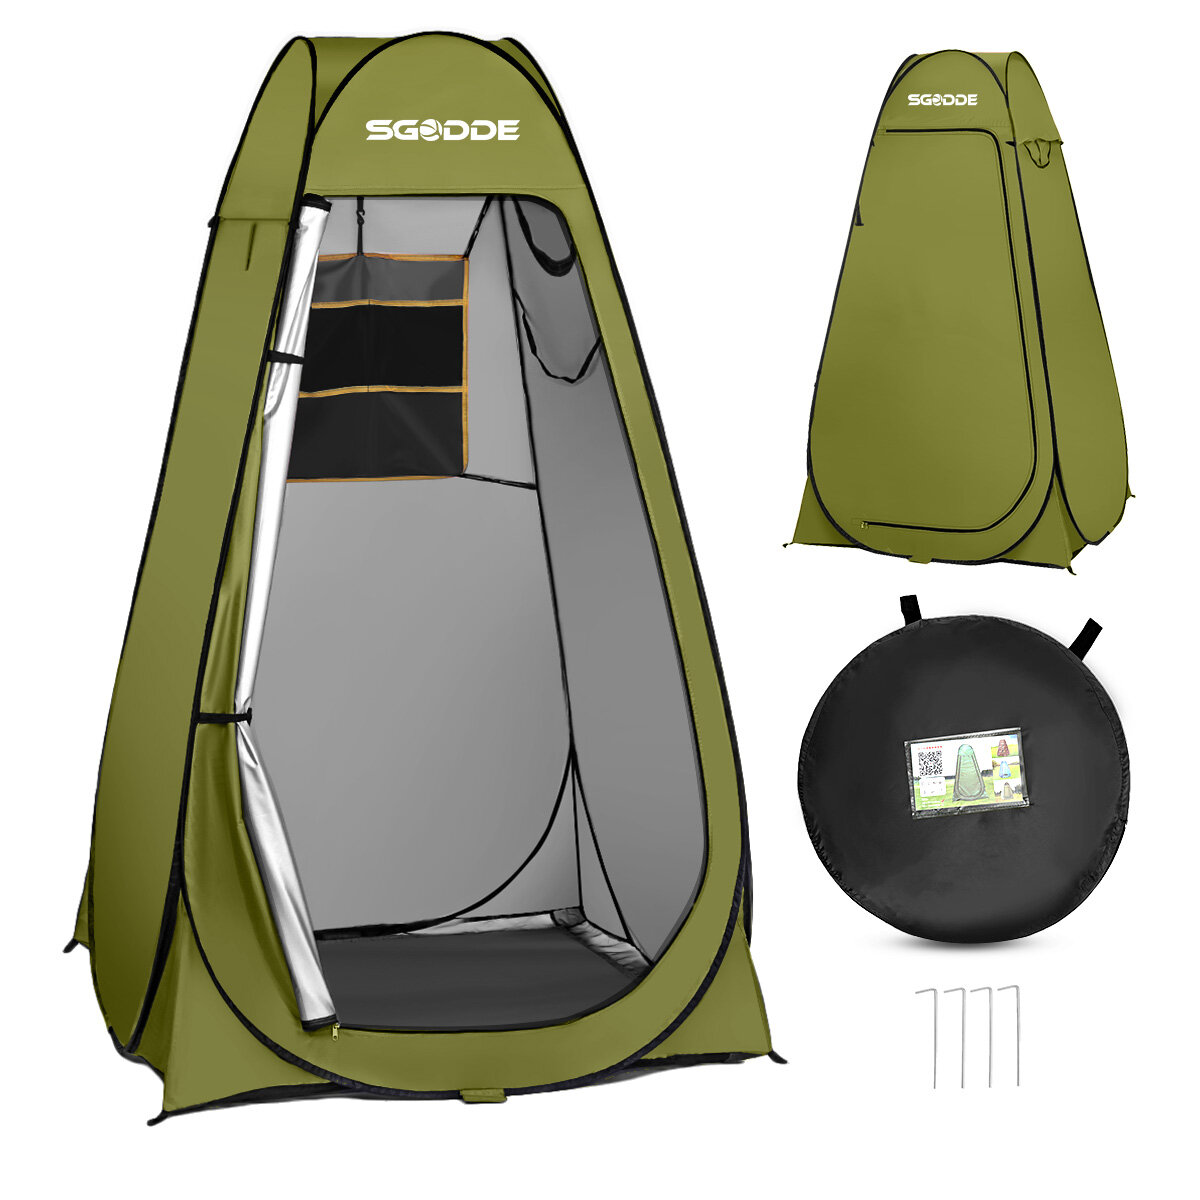 SGODDE Privacy Shower Tent Single Camping Tent Toilet Changing Room Rain Shelter Hiking Beach